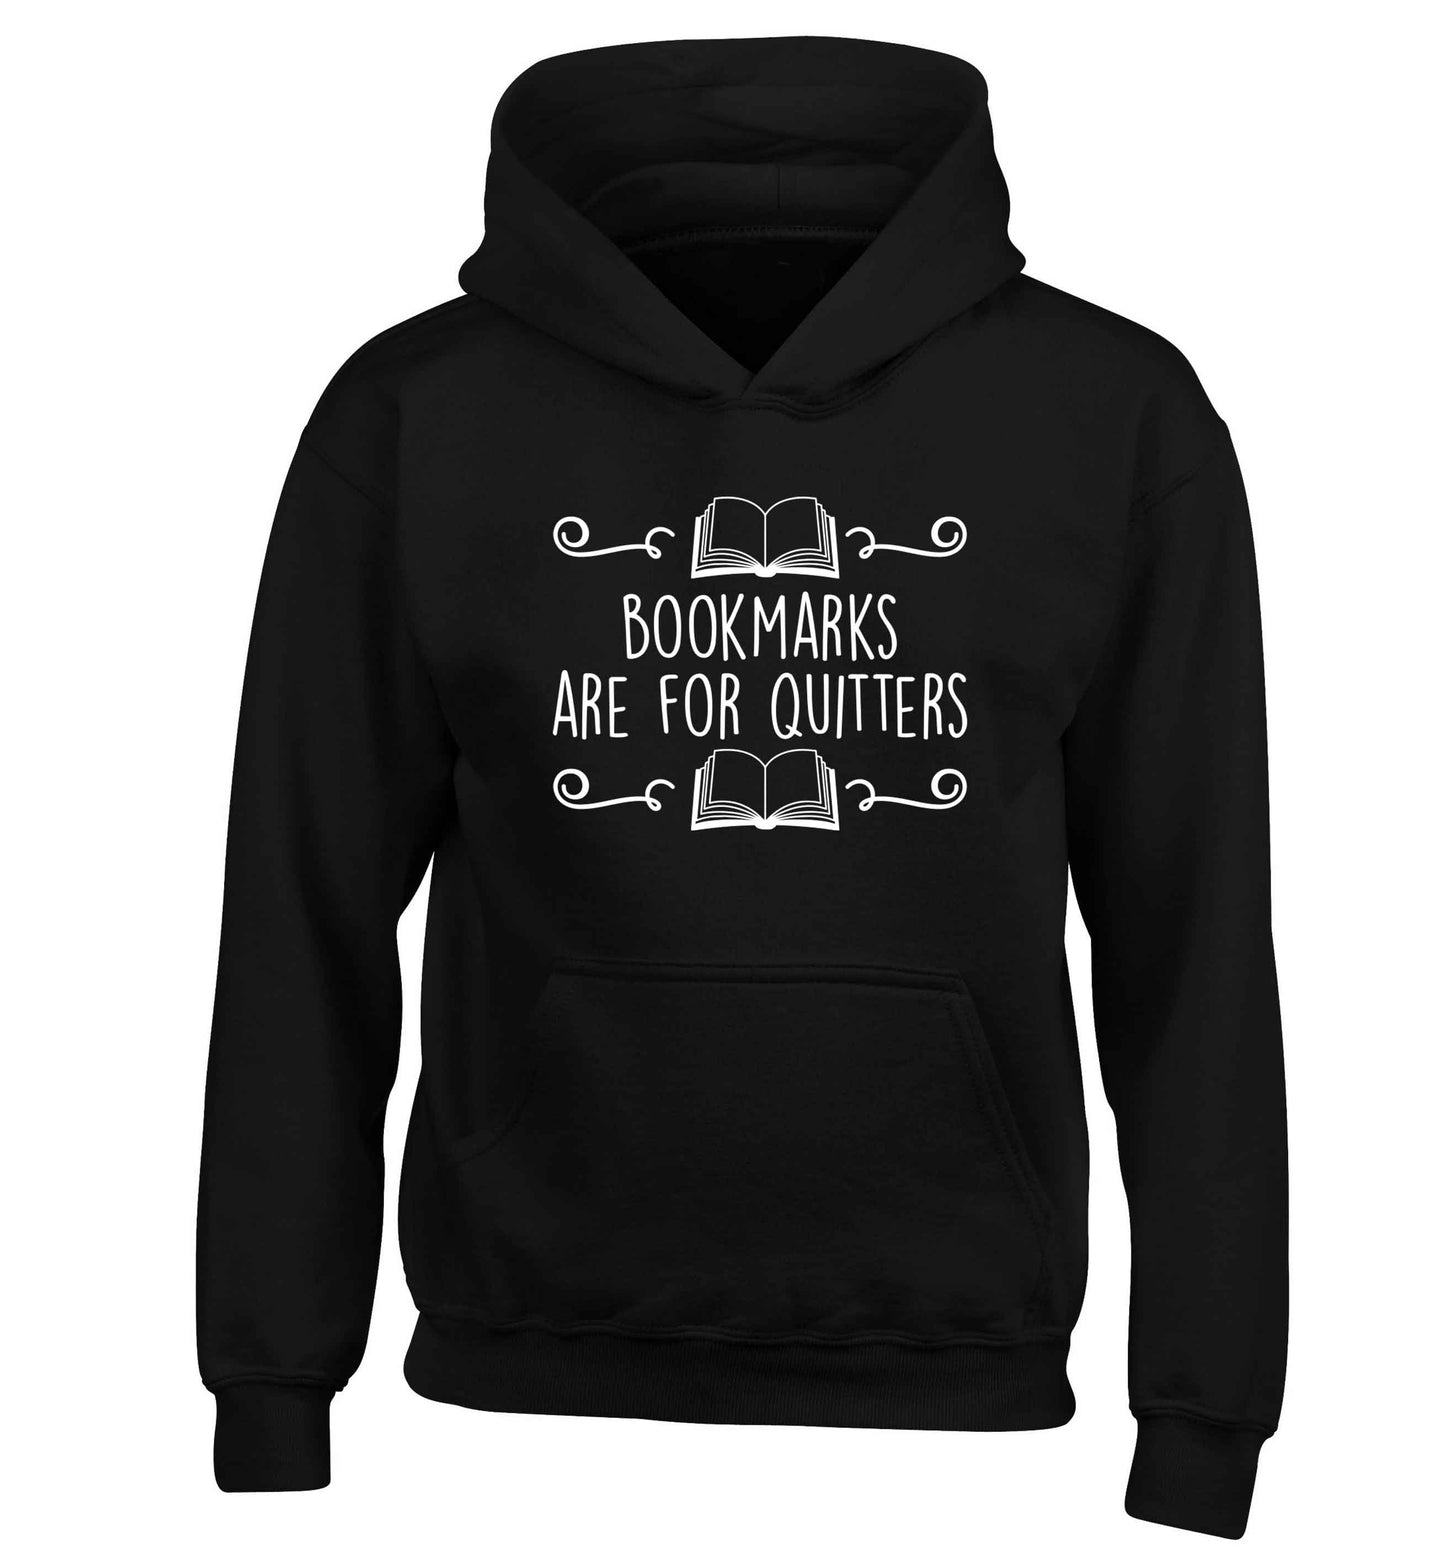 Bookmarks are for quitters children's black hoodie 12-13 Years